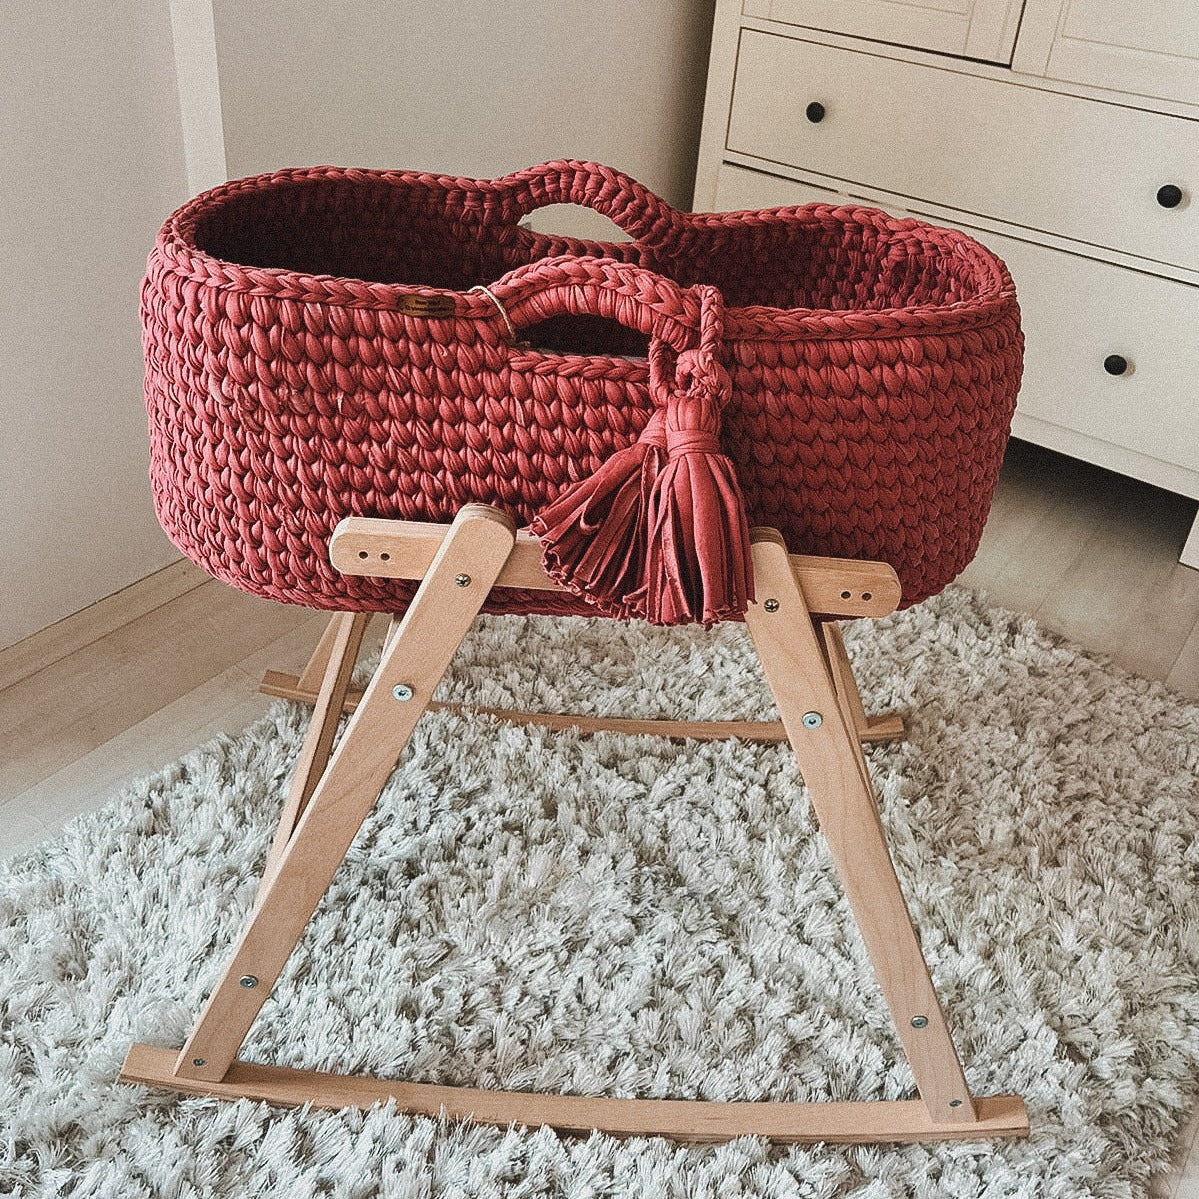 Angel Hand-Knitted Baby Bassinet - Cherry